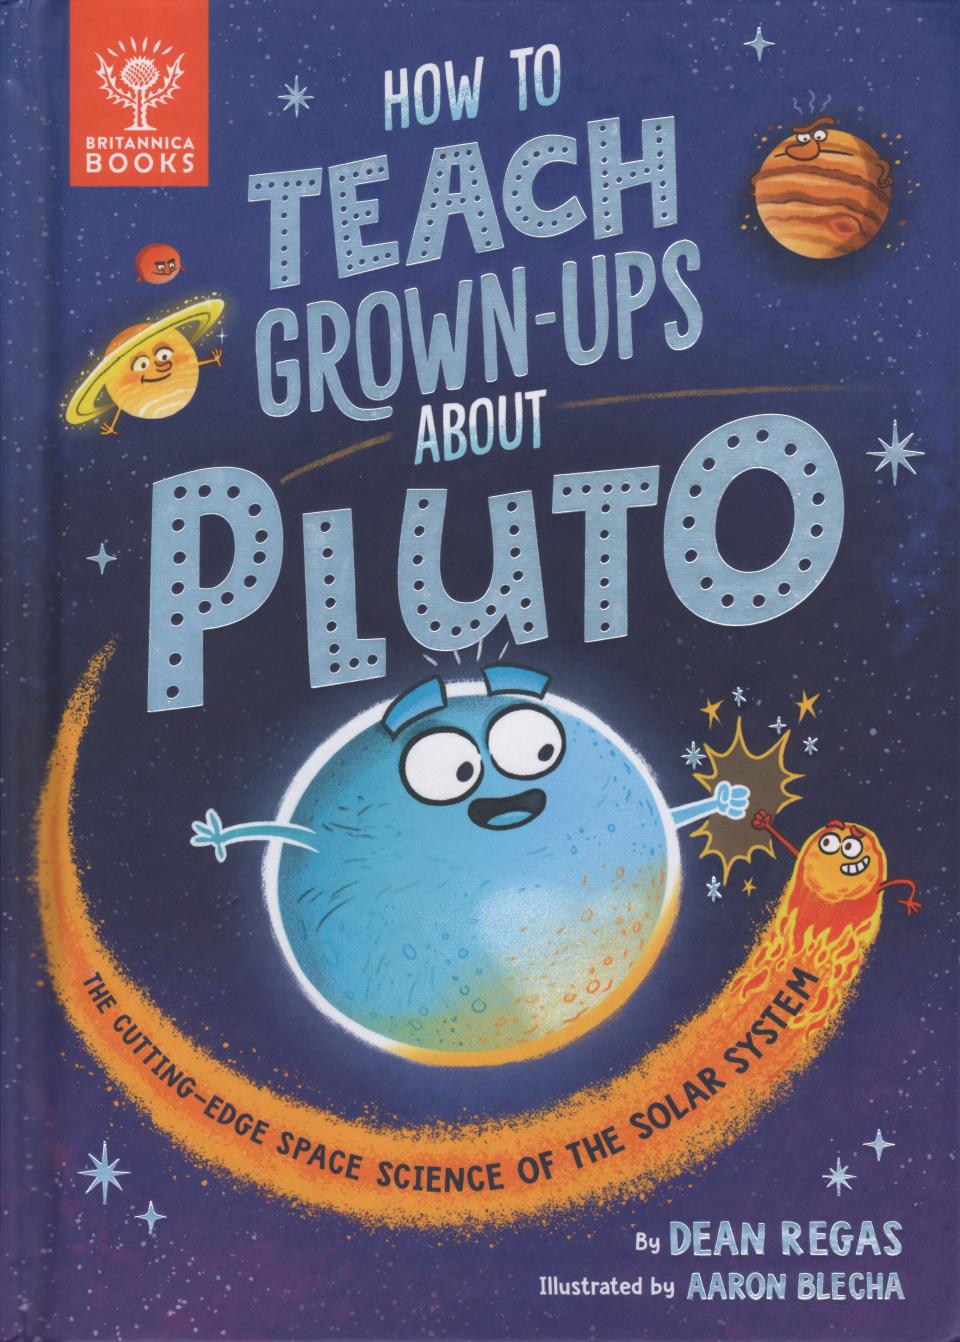 The book “How to Teach Grown-Ups About Pluto” by astronomer Dean Regas, illustrated by Aaron Blecha, 2022.